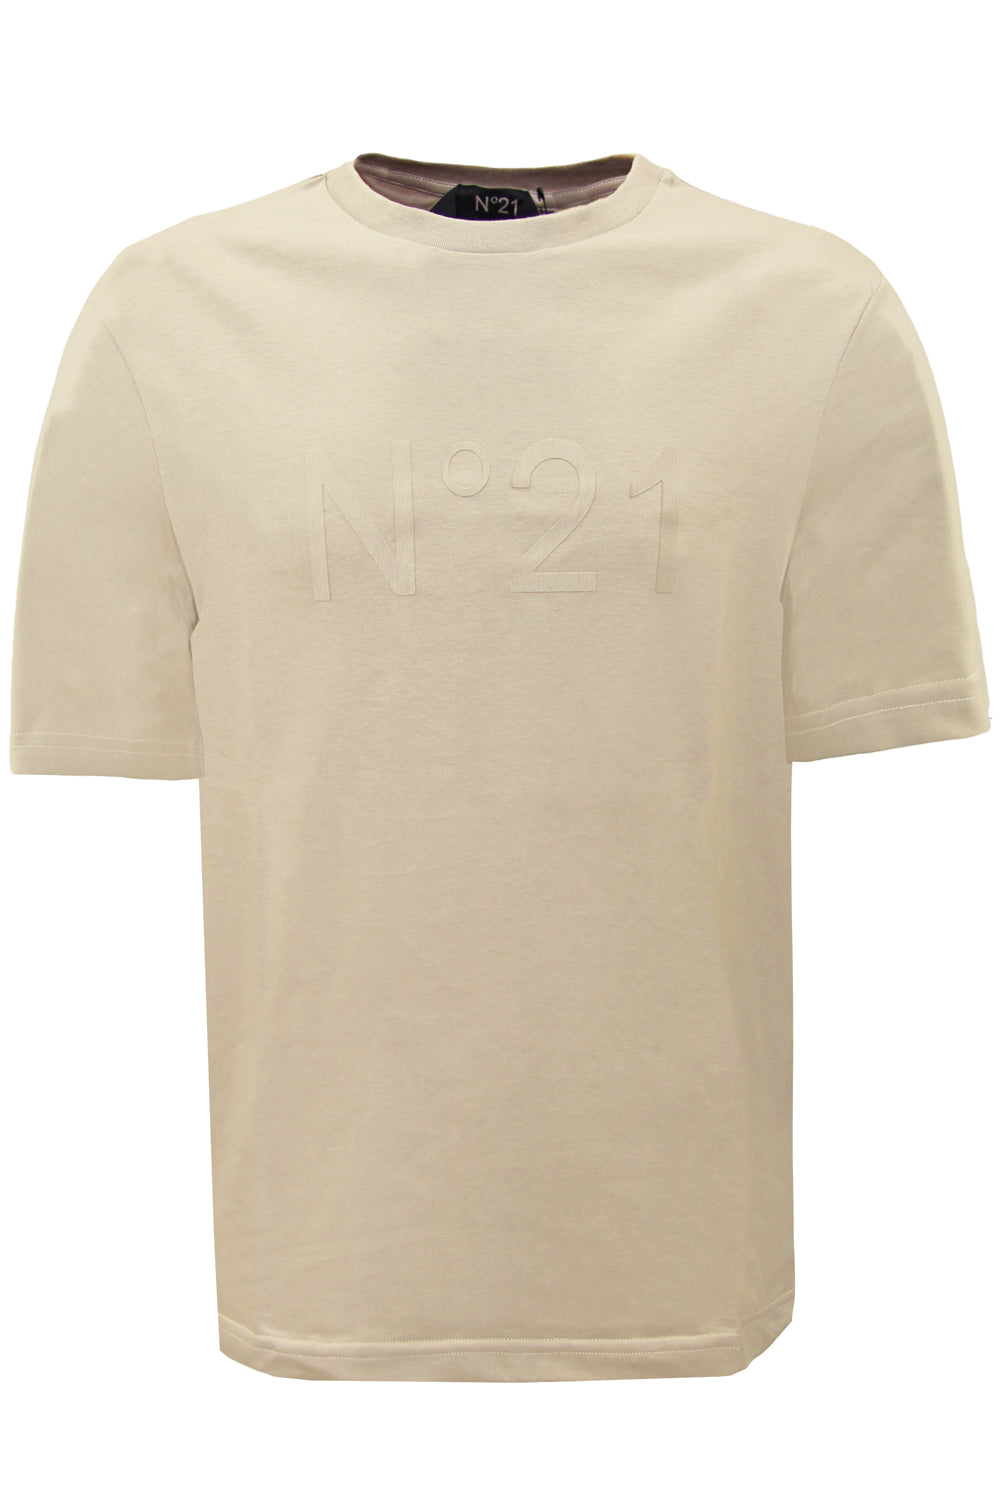 Image of N21 T-shirt con applicazione